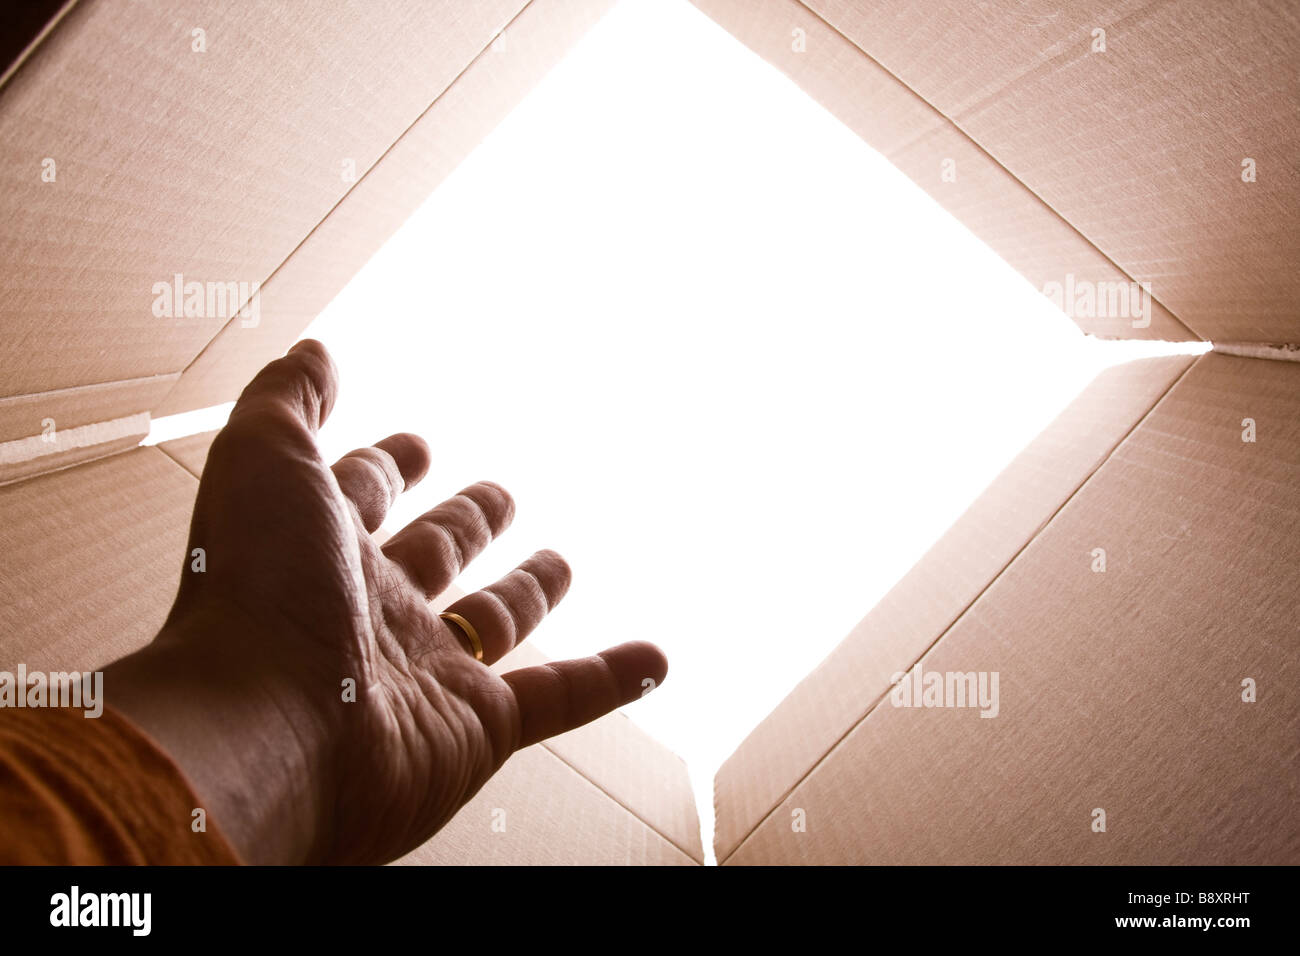 inside view of cardboard box with a hand trying escape selective focus Stock Photo